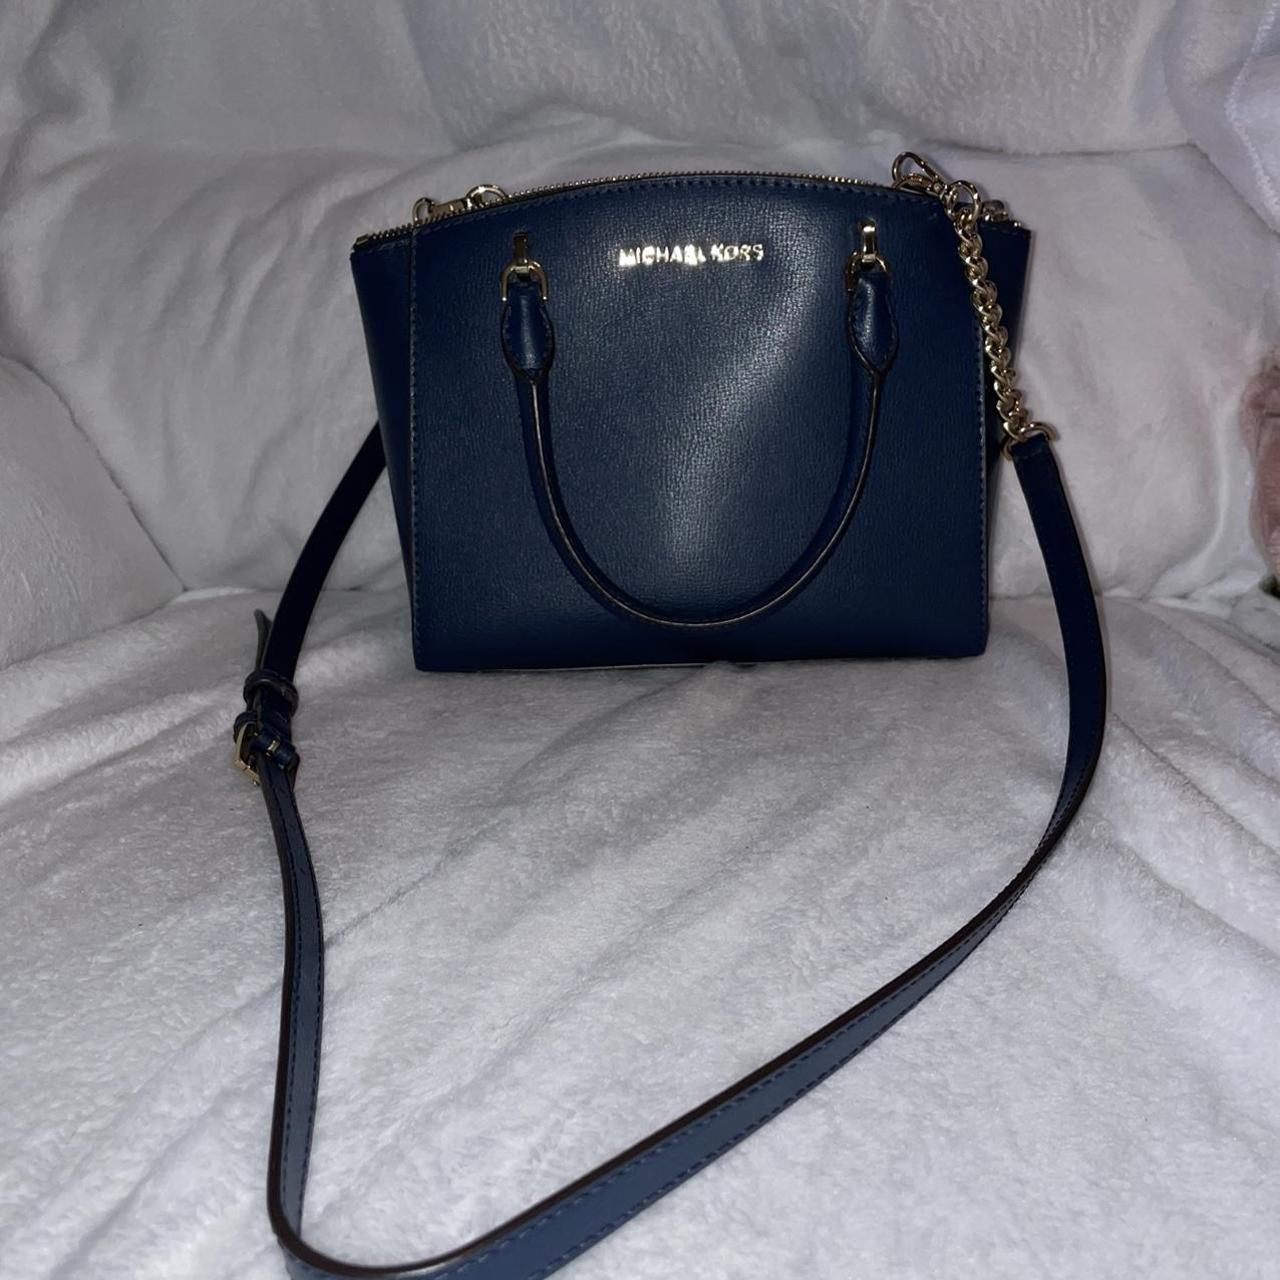 Never been used! Michael Kors purse | Purses michael kors, Michael kors bag,  Michael kors